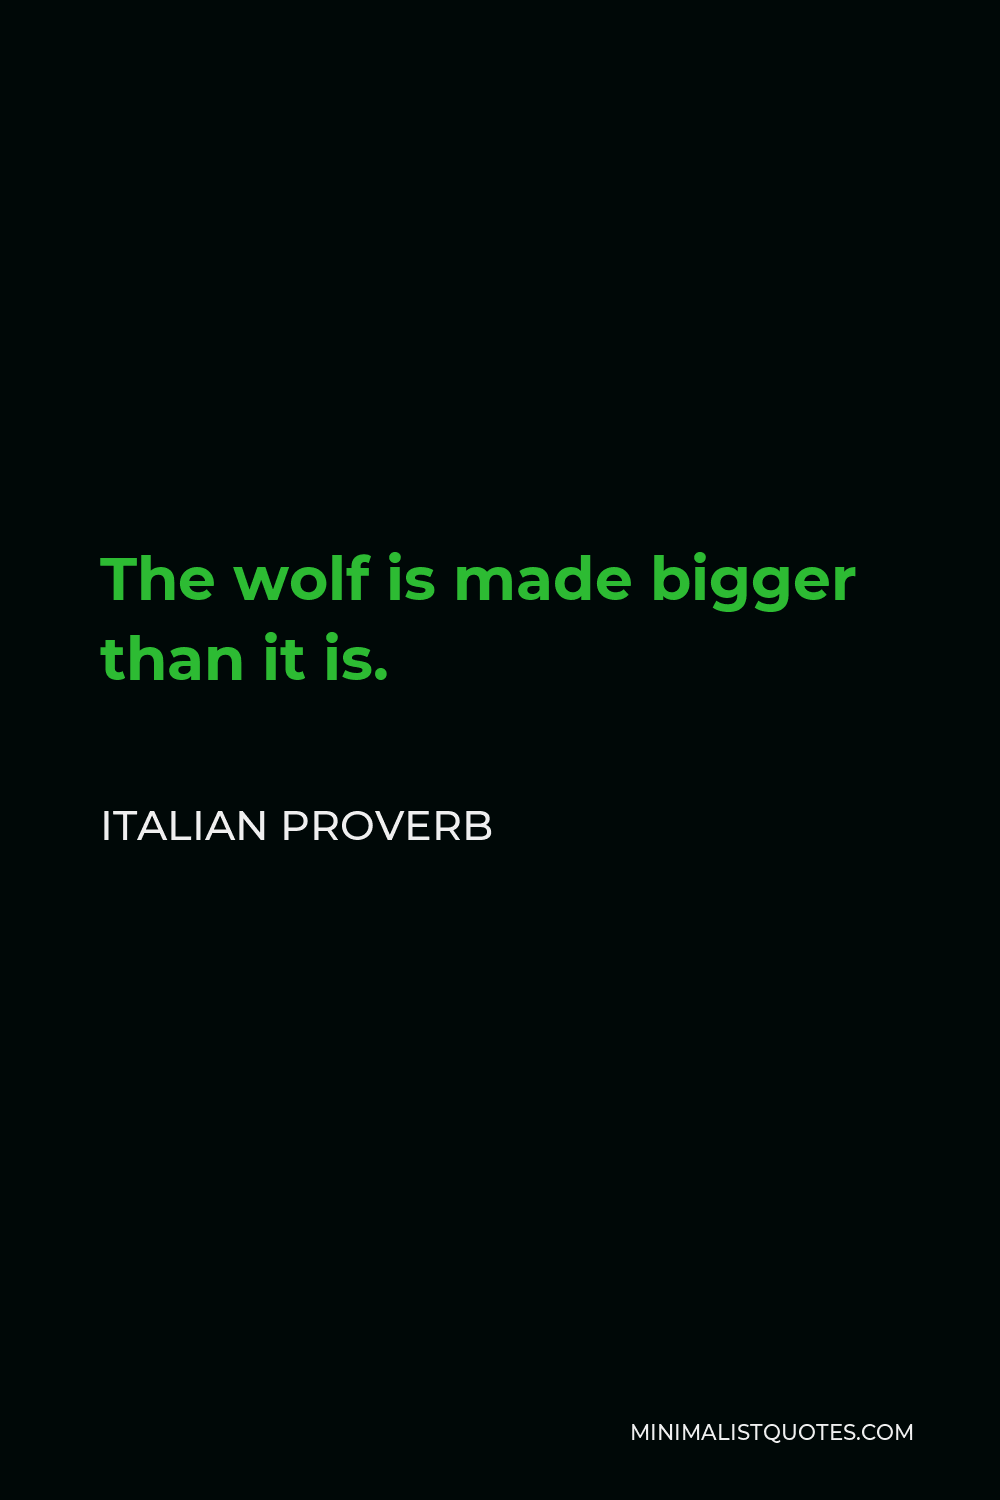 Italian Proverb Quote - The wolf is made bigger than it is.